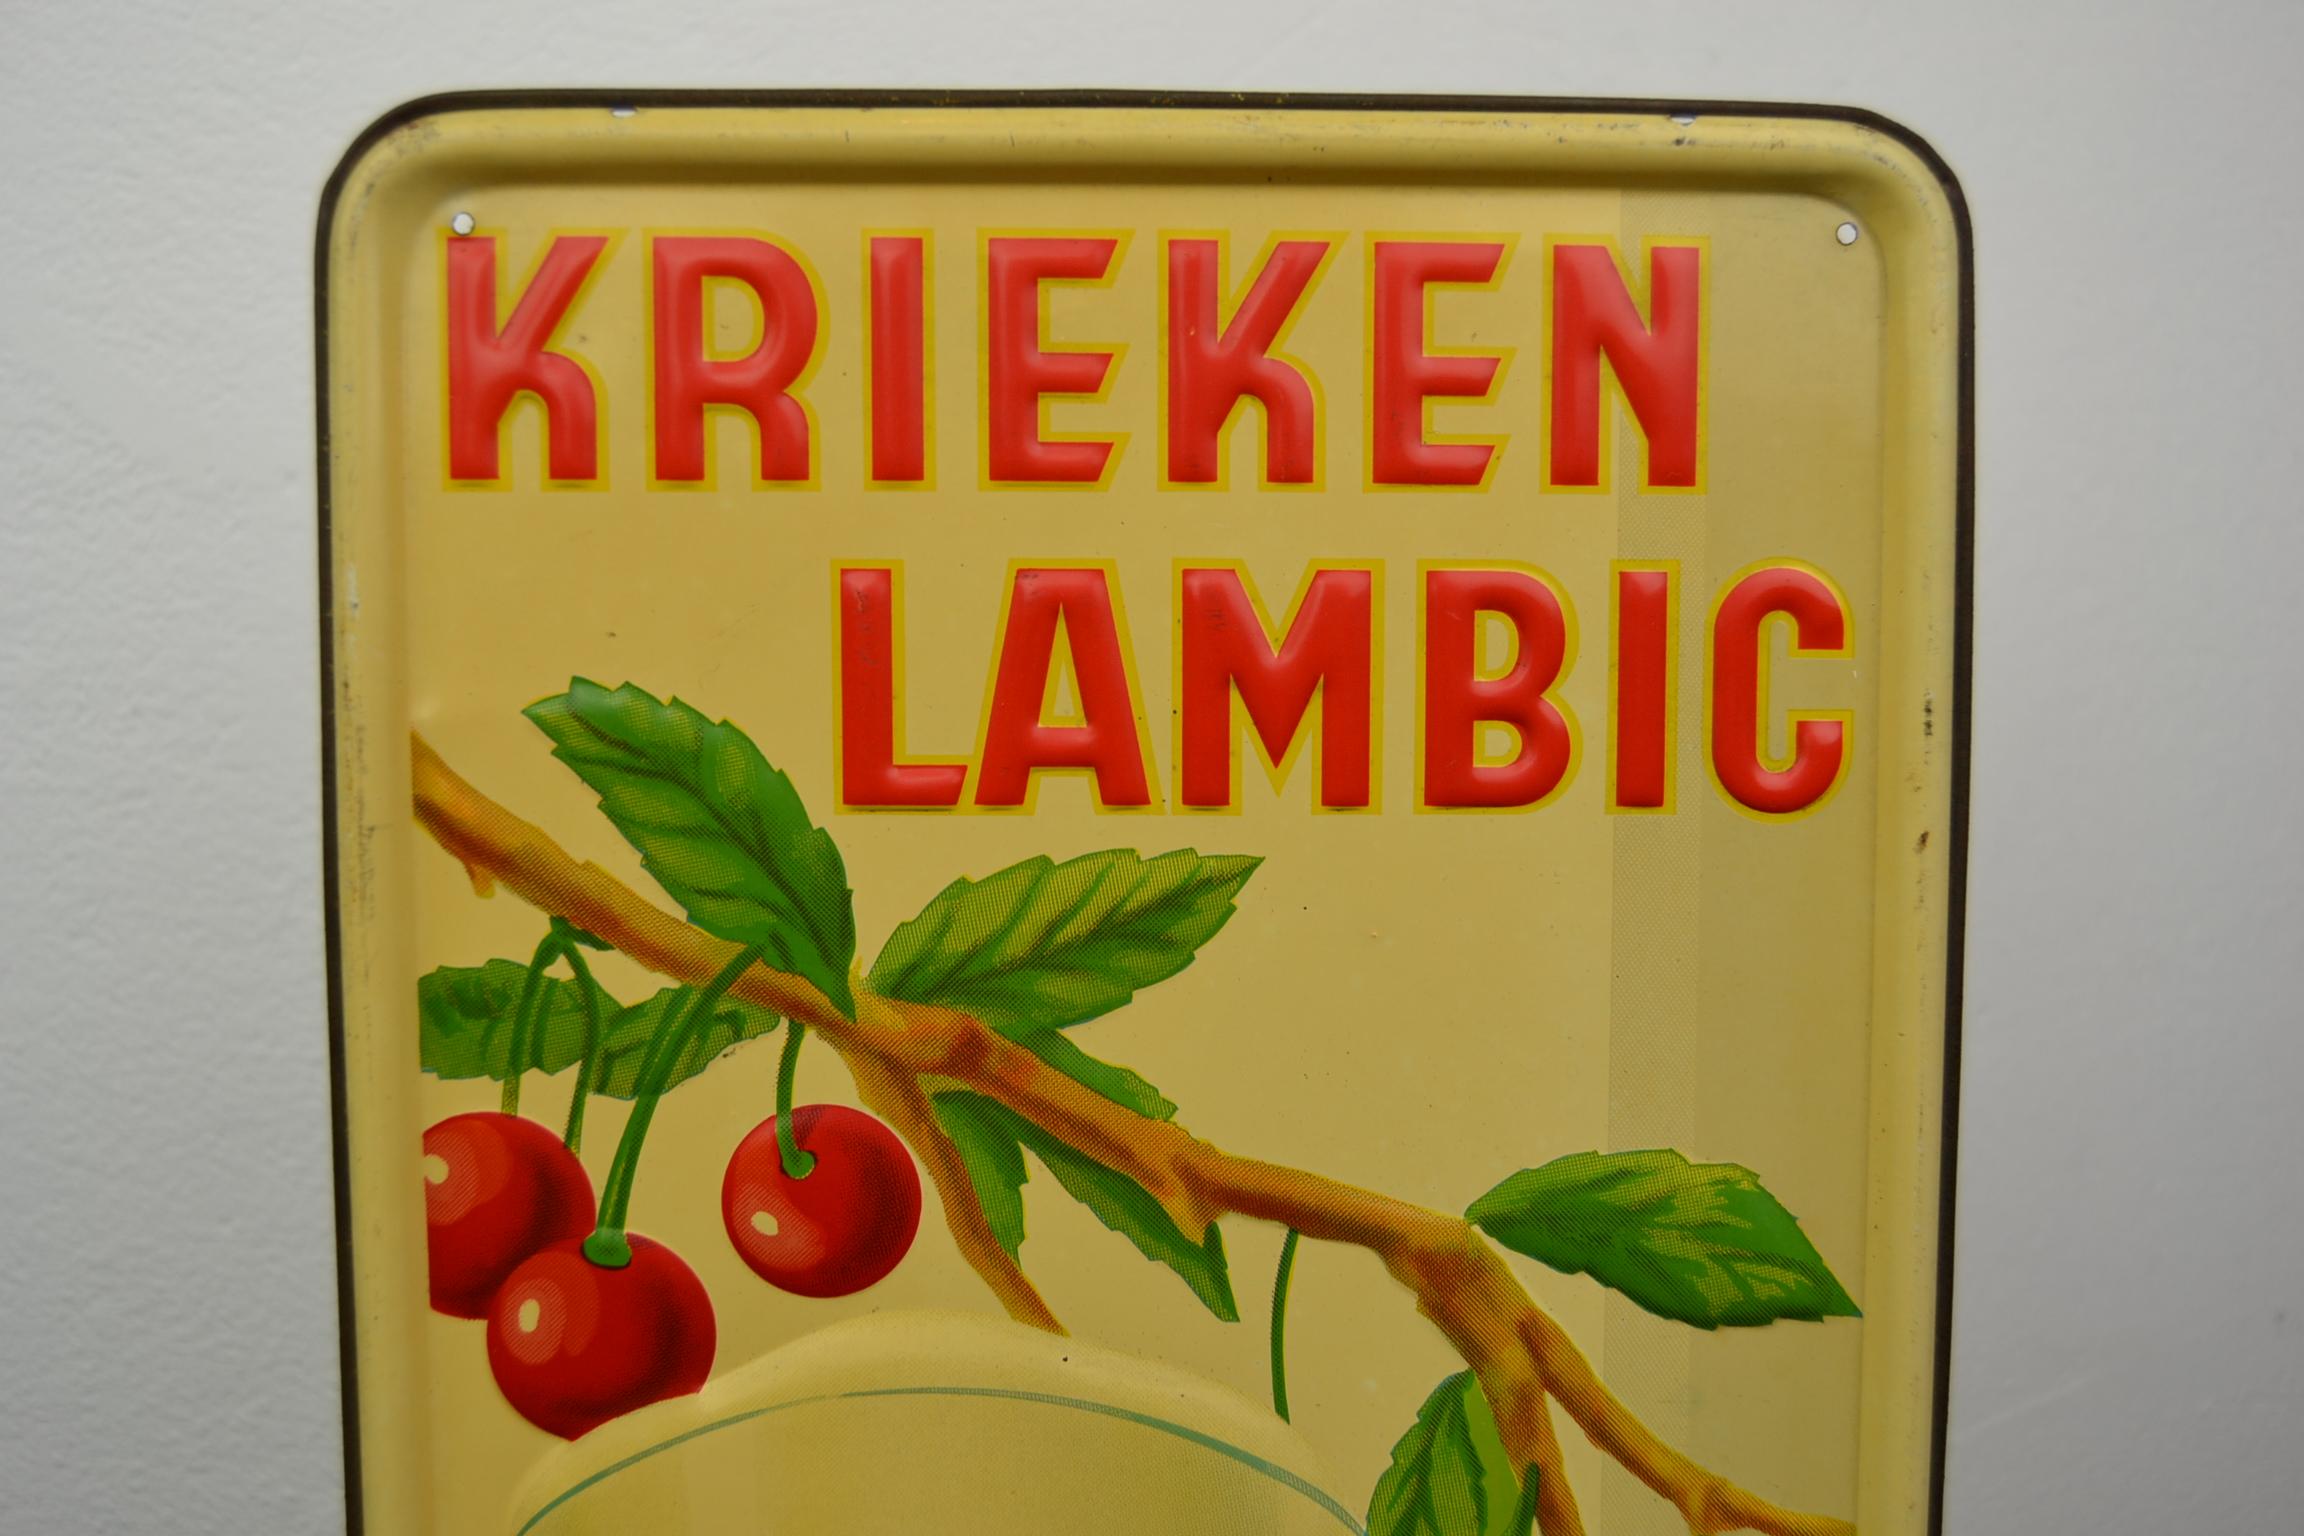 1930s tin advertising sign for Belgian beer, cherry beer Lambic.
This tin publicity sign for brewery dry- pikkel (1904-1955) dates from 1937
And was made by Jofico Brussels.
The bright red color of the cherries and the glass filled with cherry